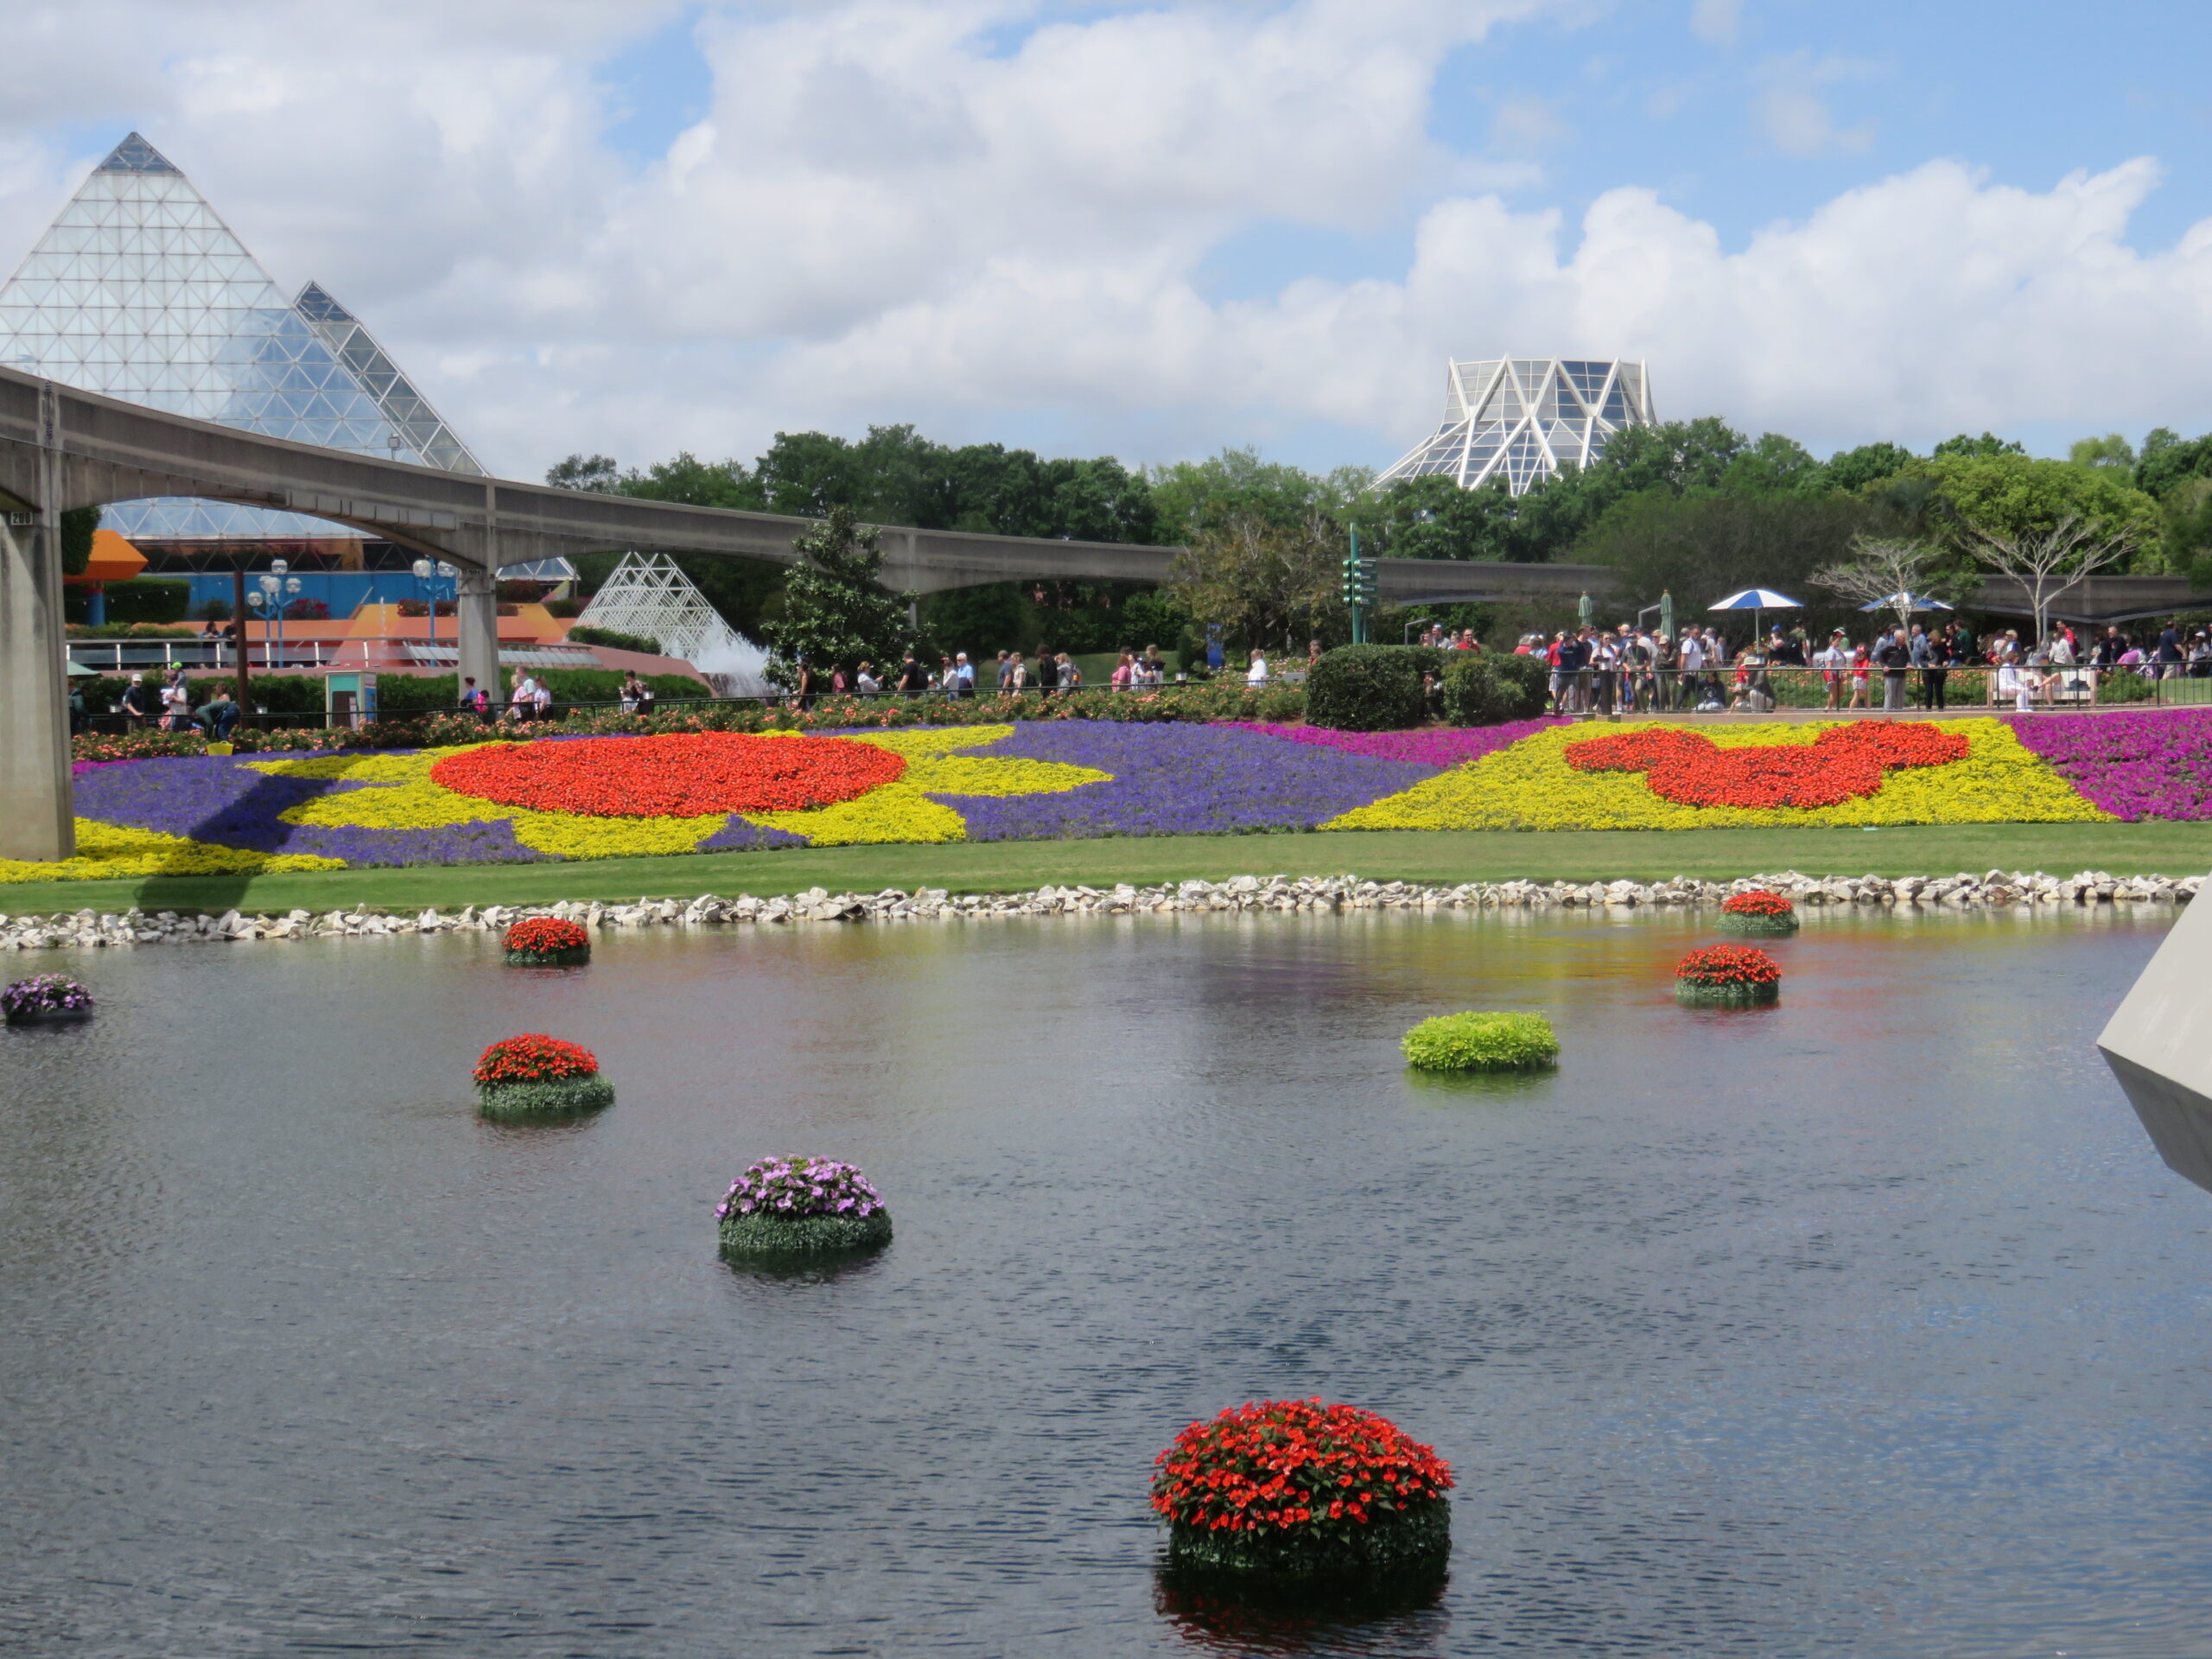 Epcot flowers across the water